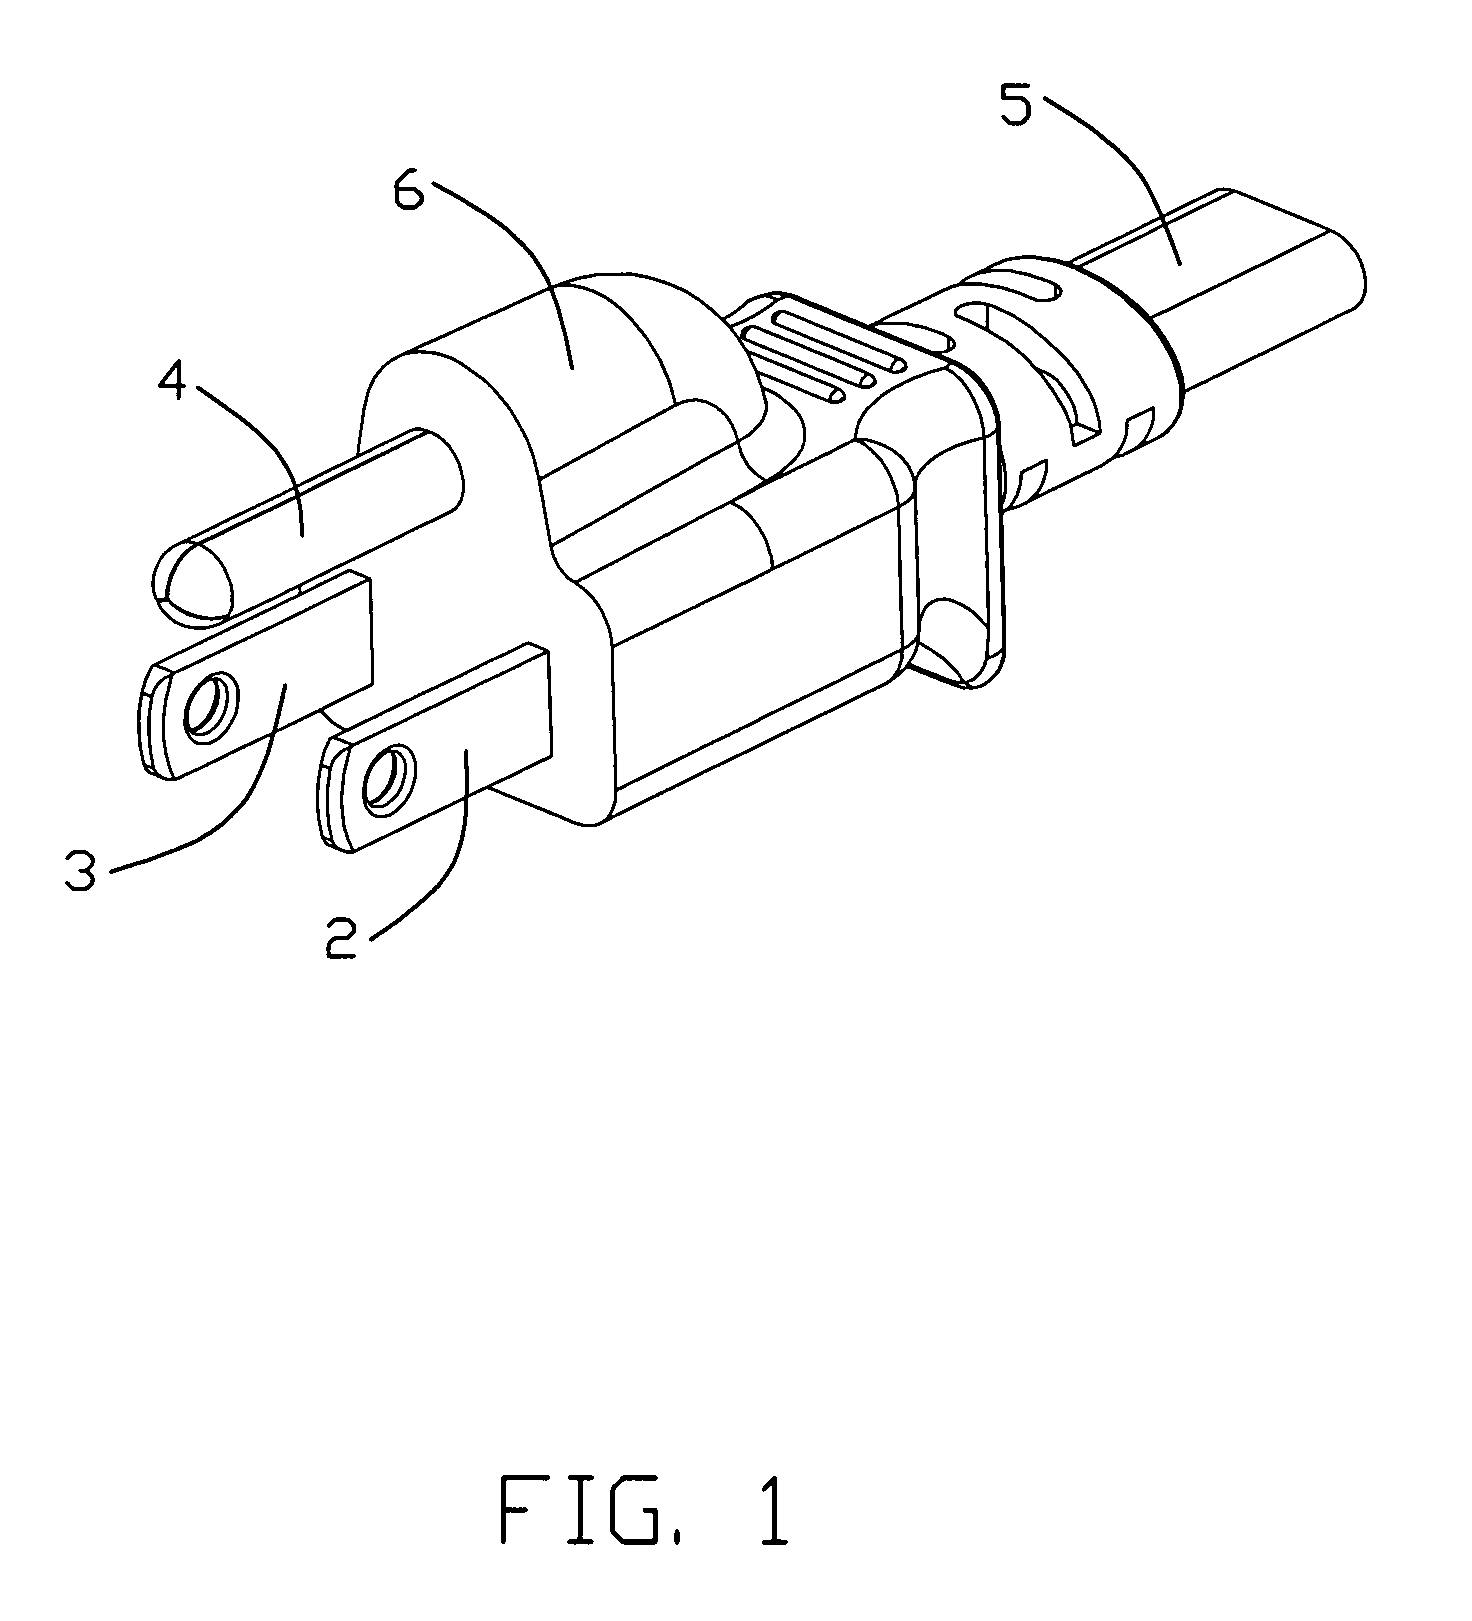 Power plug assembly with improved connector configuration